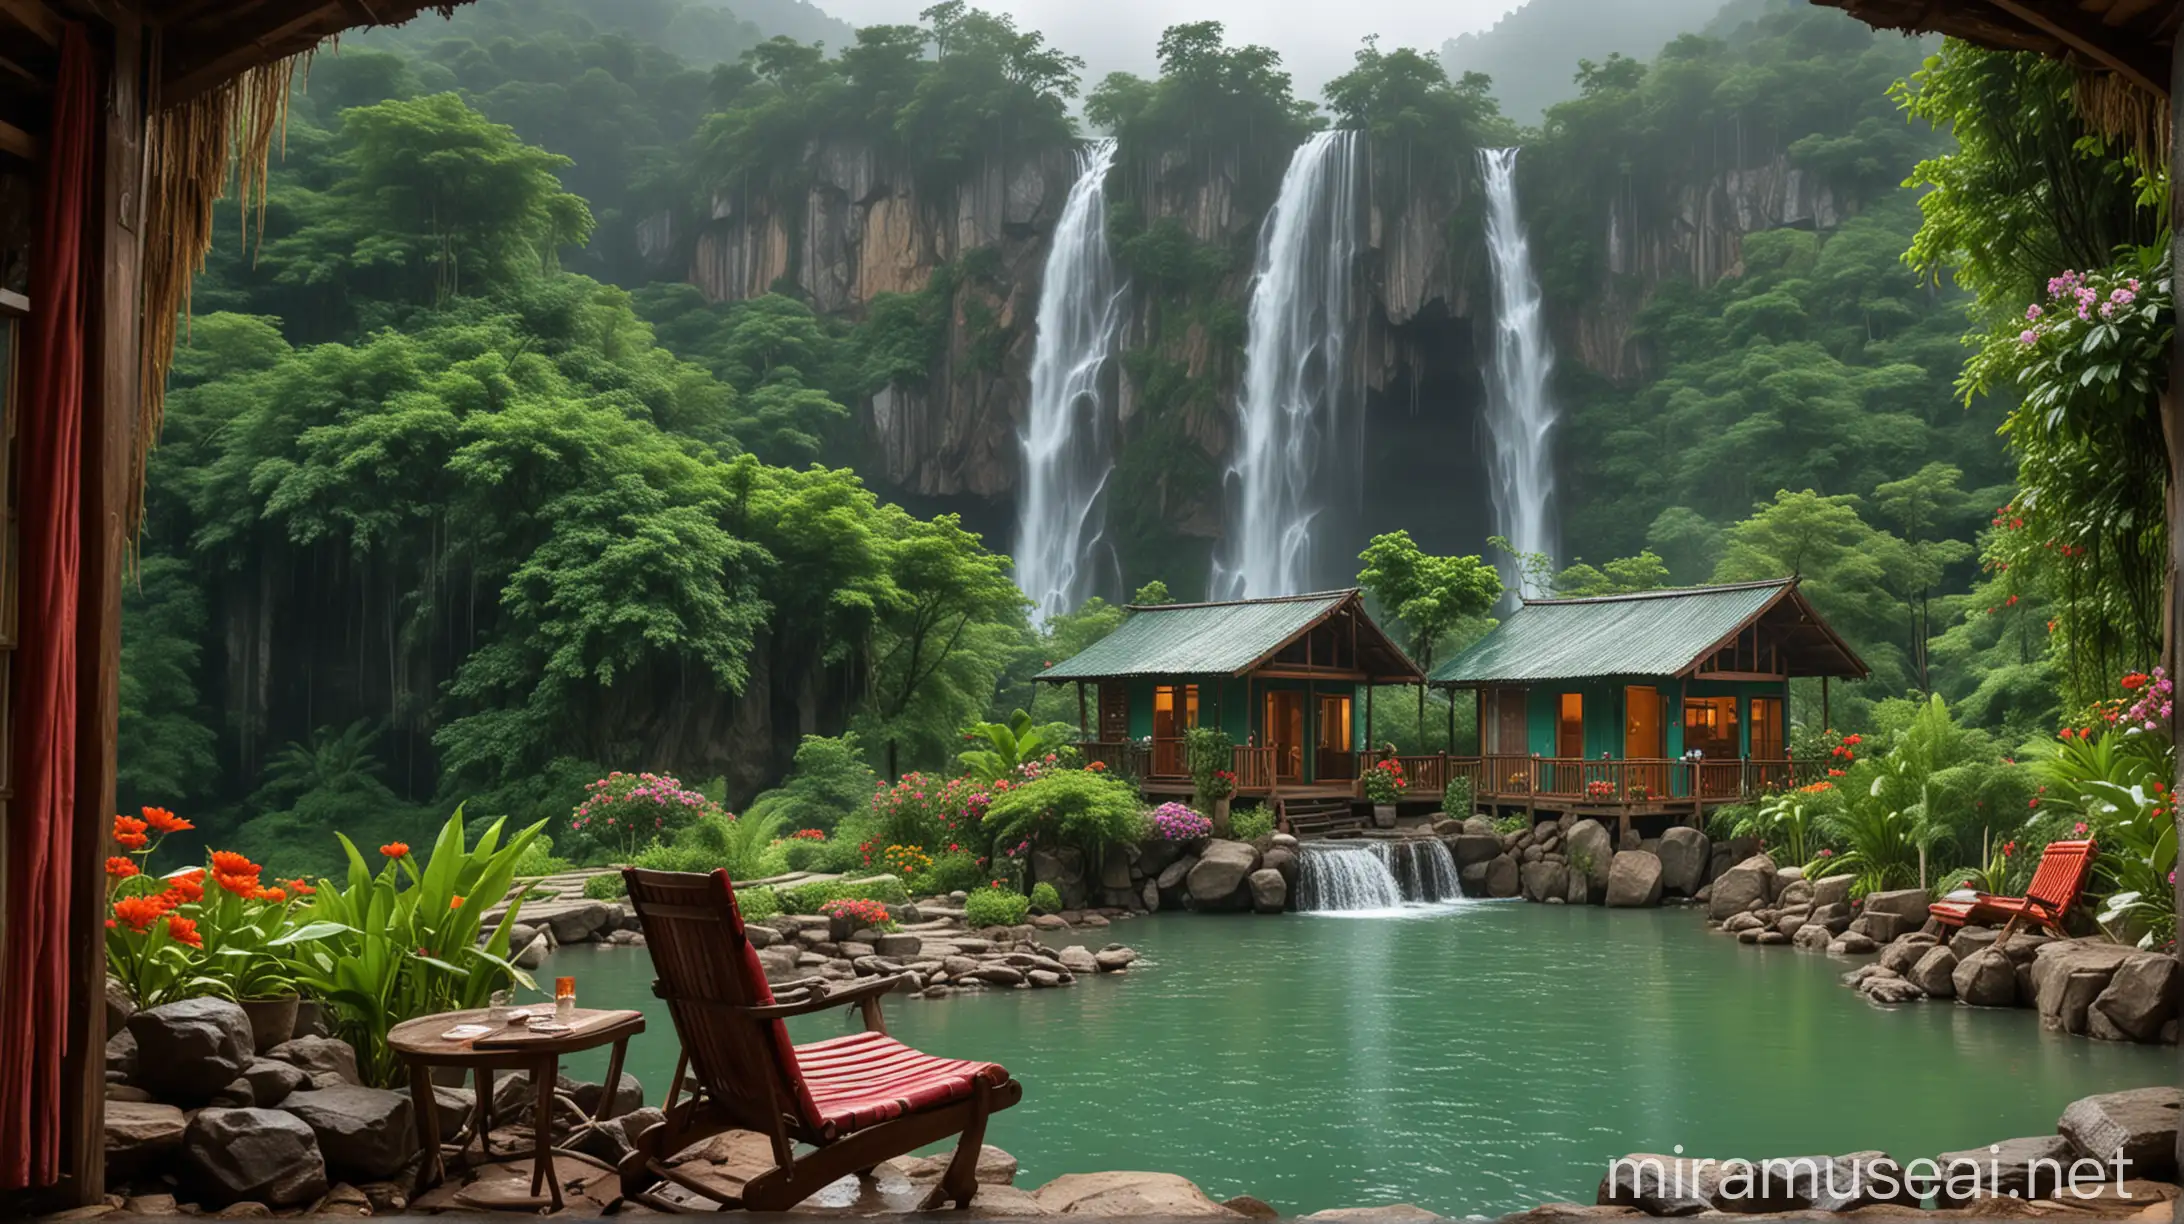 moonsoon house inside view at mountain with flowers and waterfall and sitting chairs a waterfall with a hut and a lake, in the style of 32k uhd, moonsoon emerald and green, colorful dreams, romantic riverscapes, beautiful scenery 
mountain waterfall sia view rainy weather monsoon